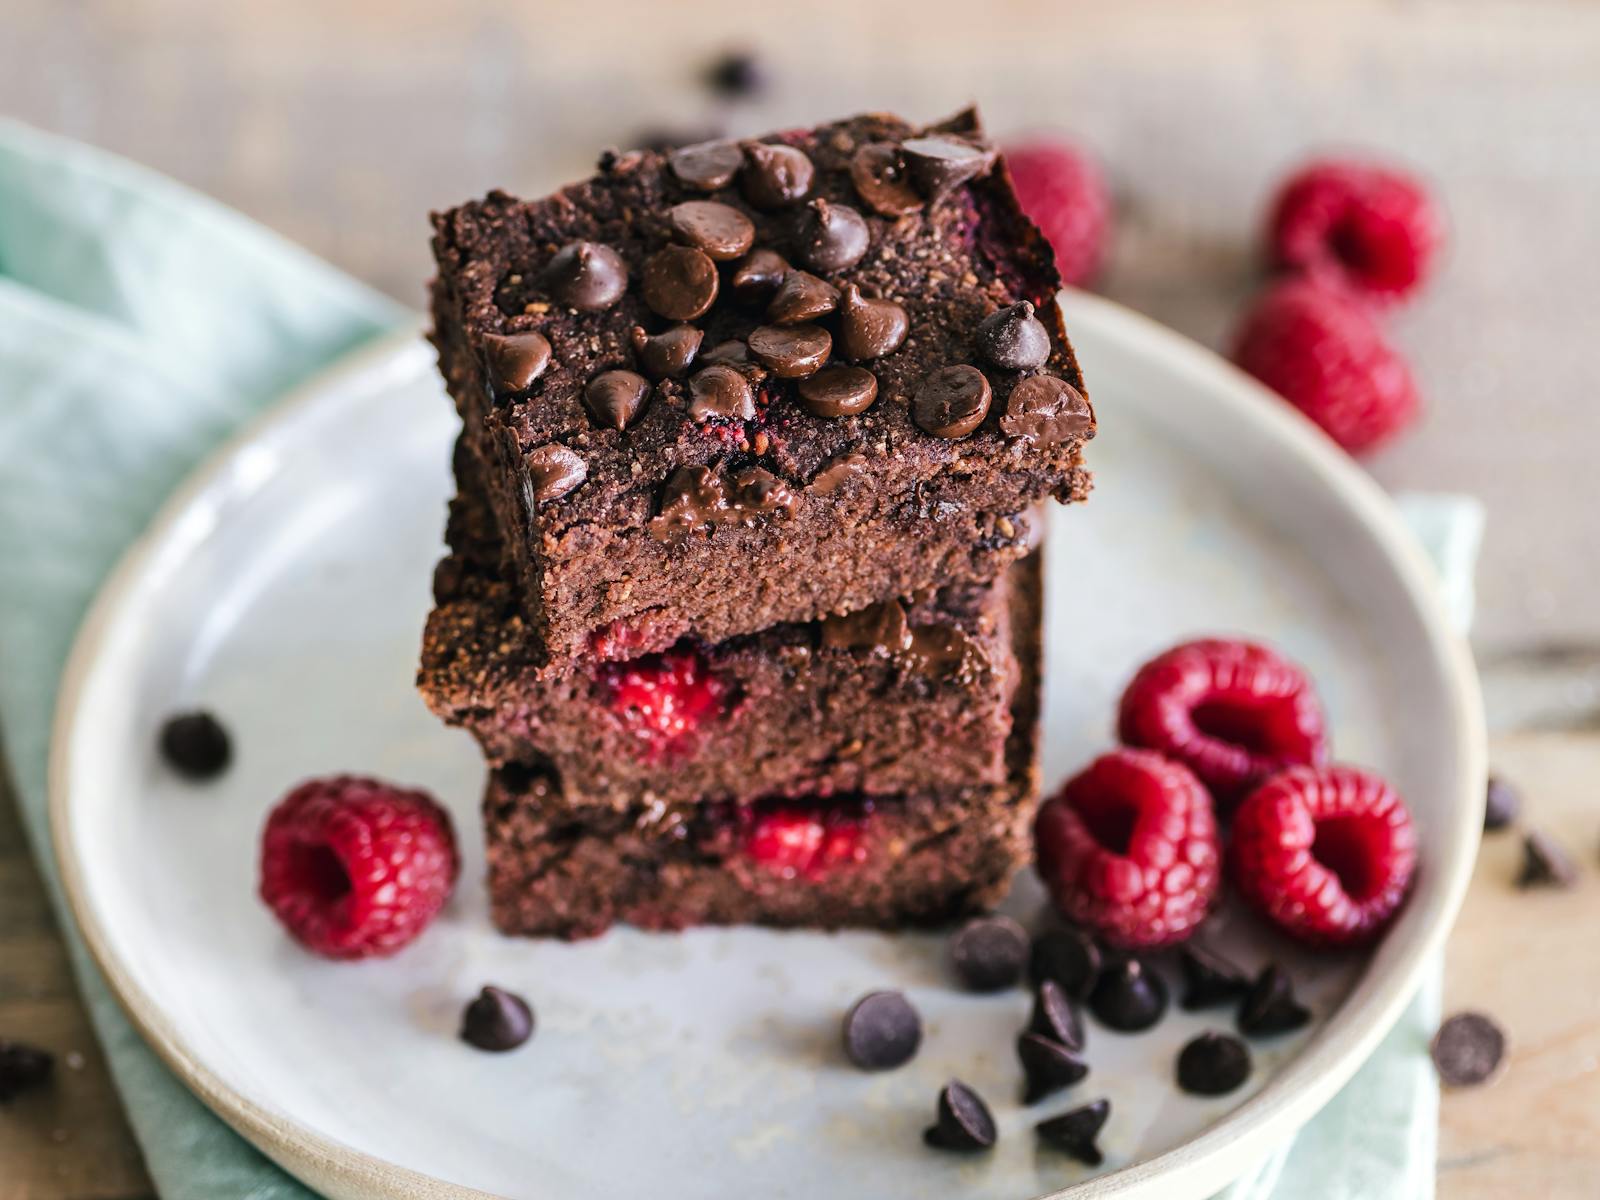 Looking for a vegetarian twist on a classic dessert? These easy-to-follow vegetarian brownies from Simply Recipes are the perfect chocolate treat.